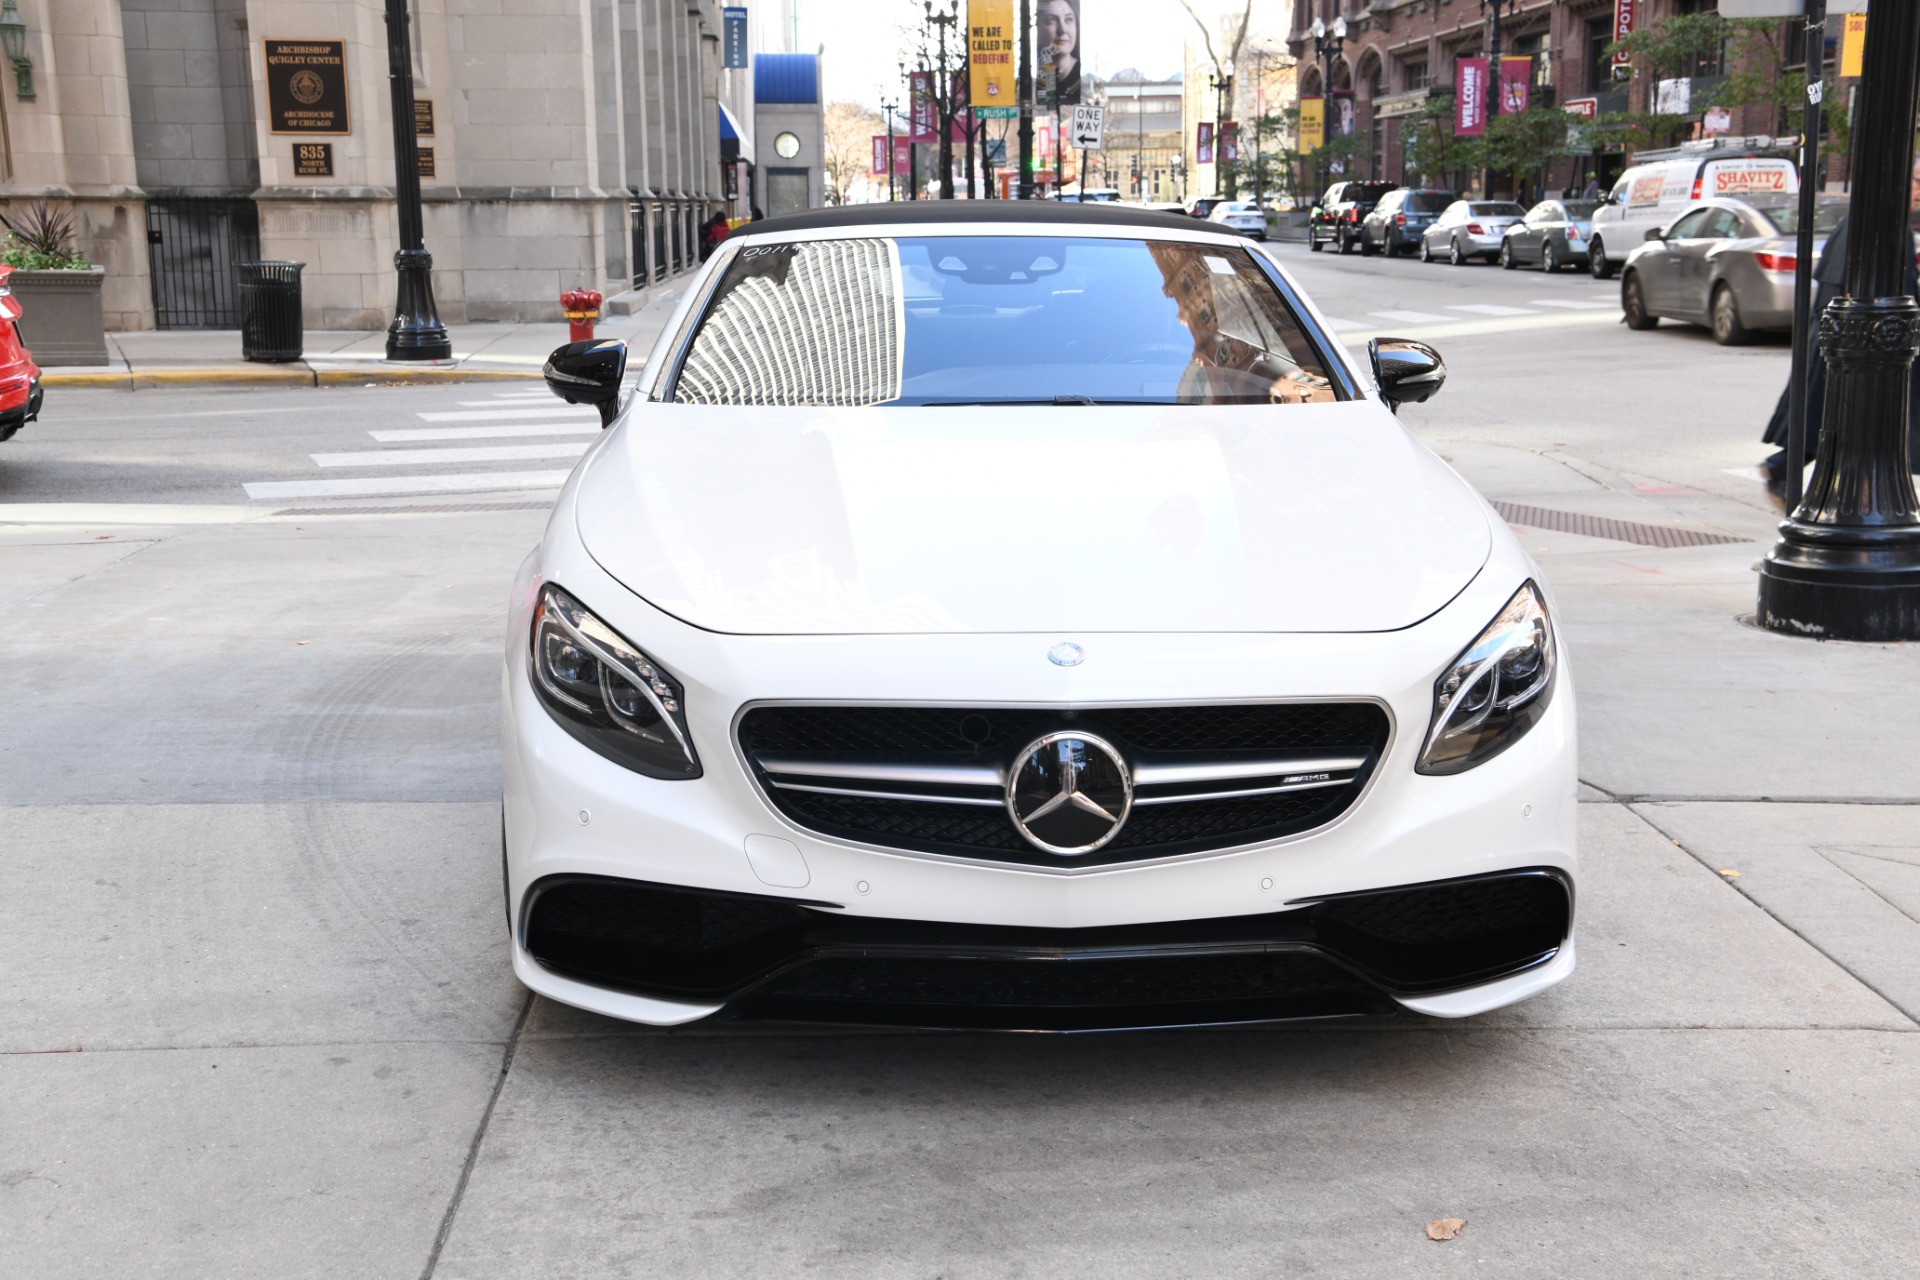 Used 2017 Mercedes-Benz S-Class AMG S 63 | Chicago, IL